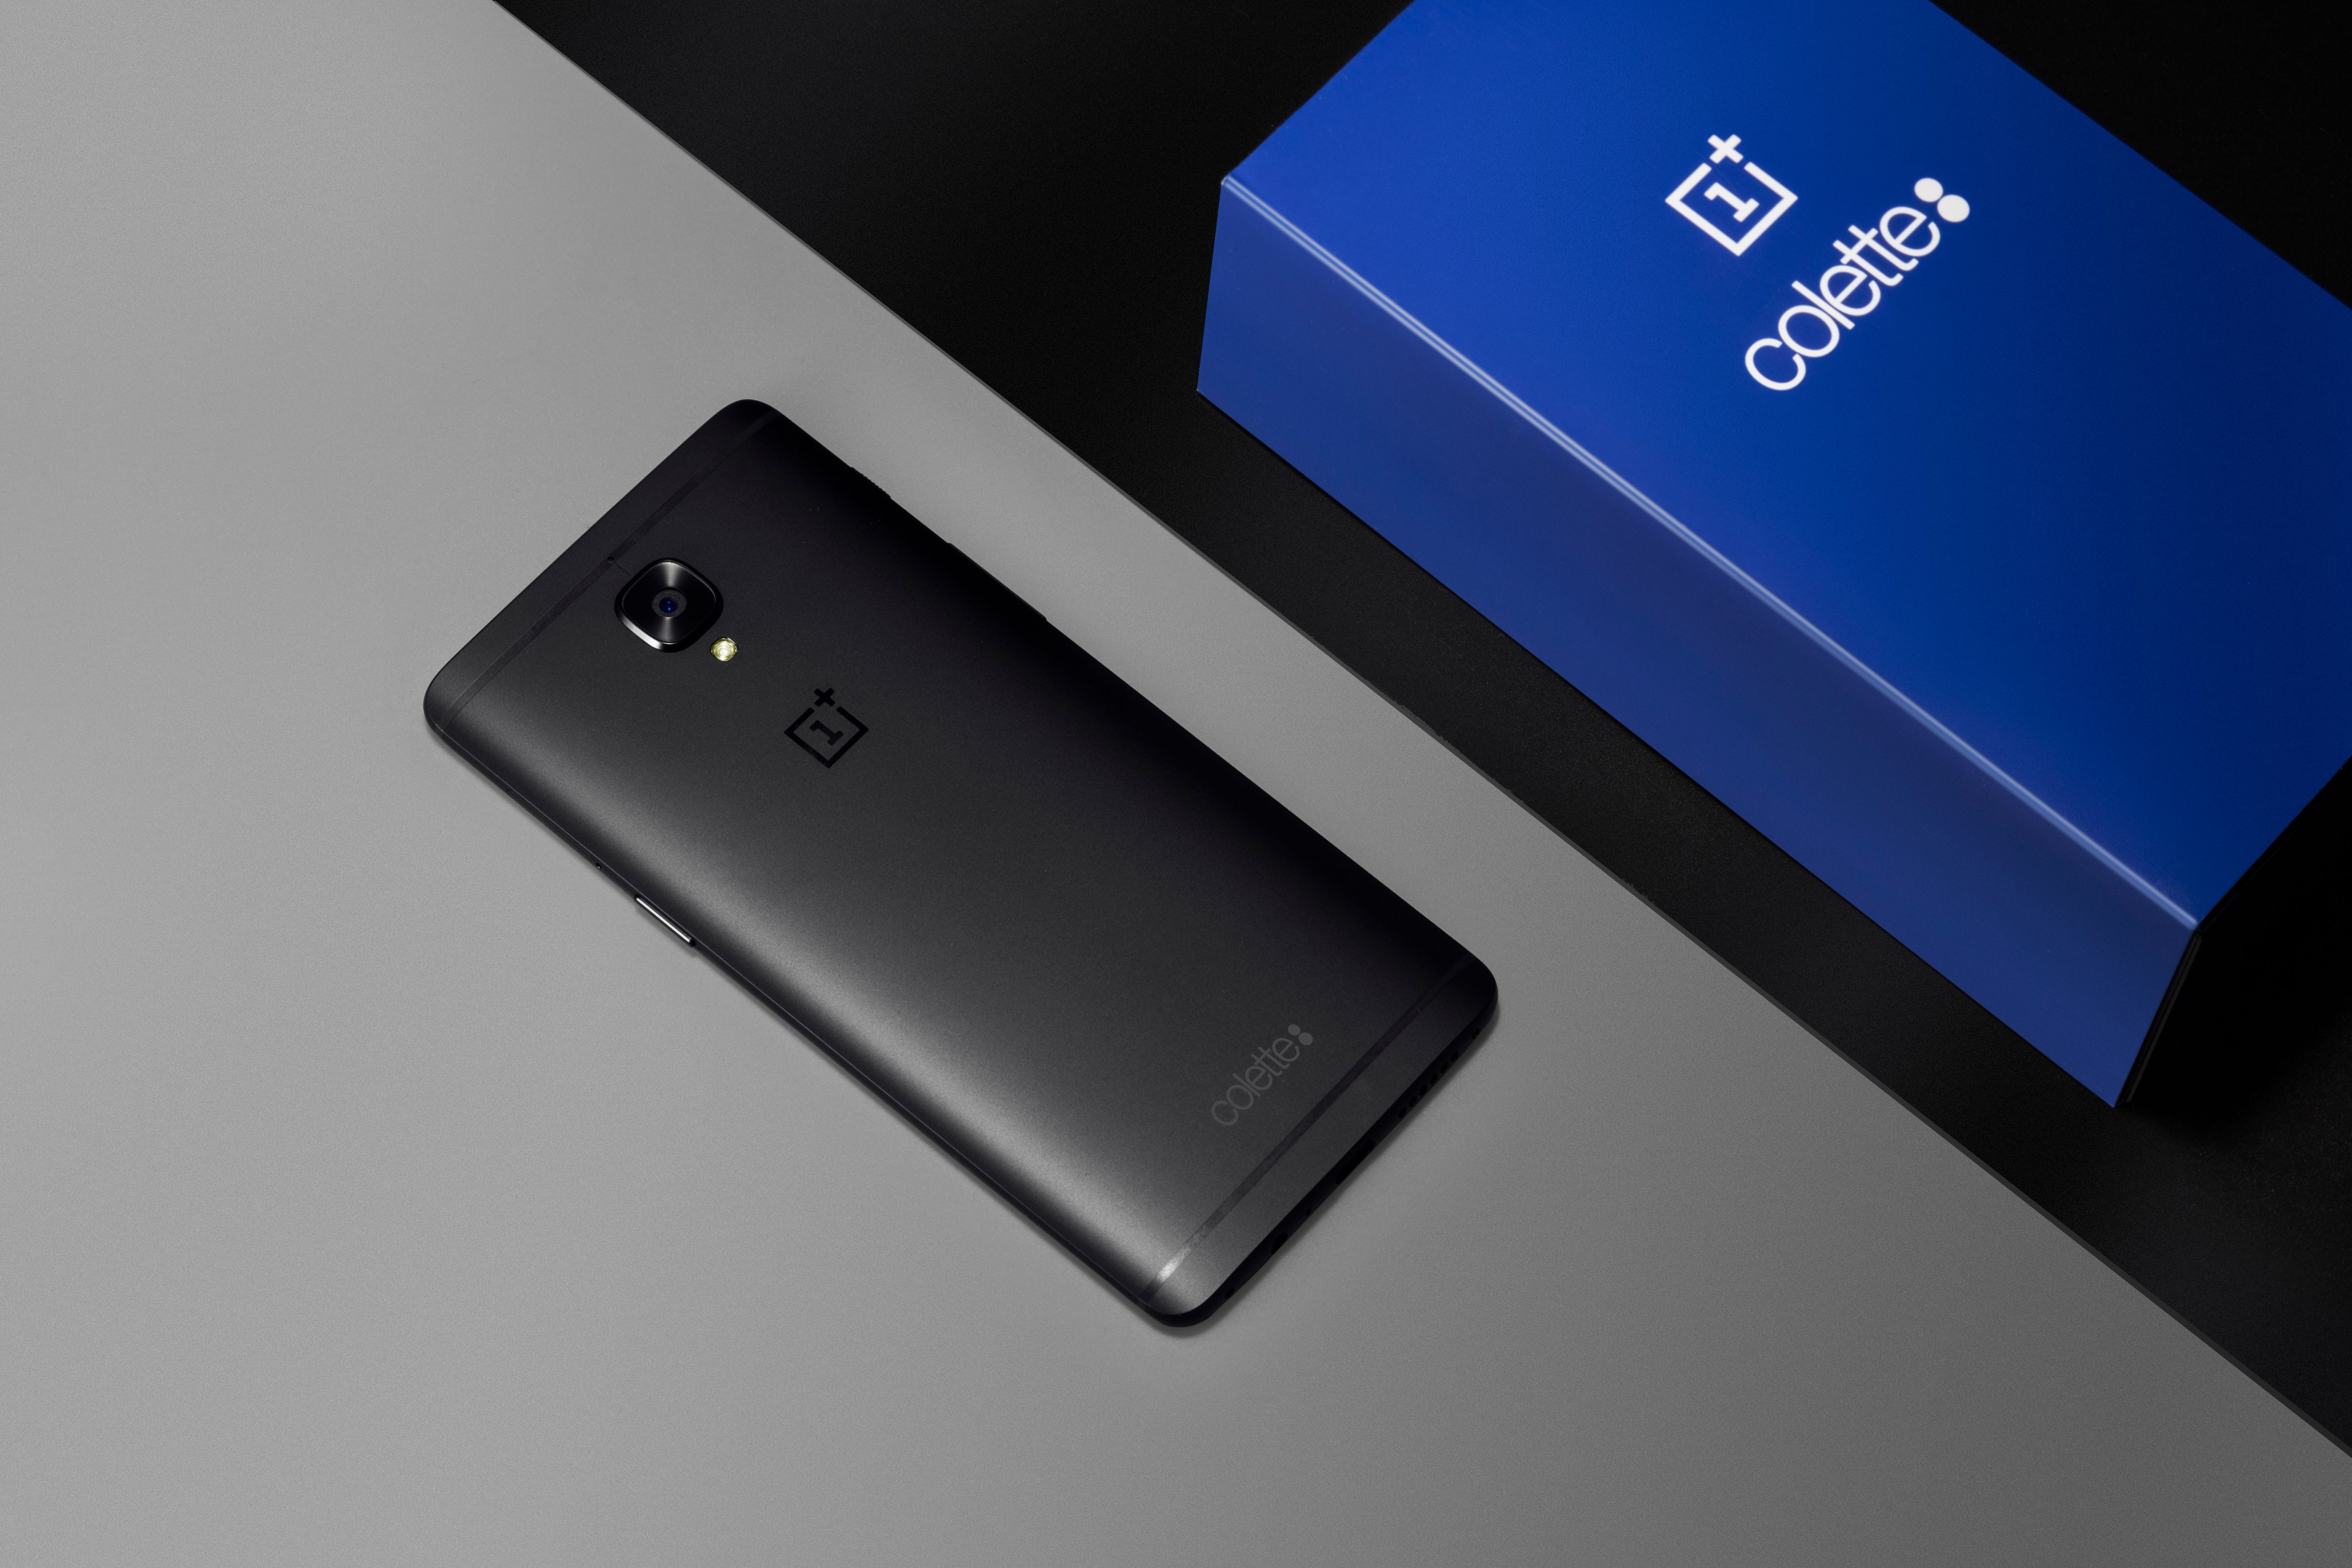 oneplus teams up with colette to launch limited edition oneplus 3t image 1